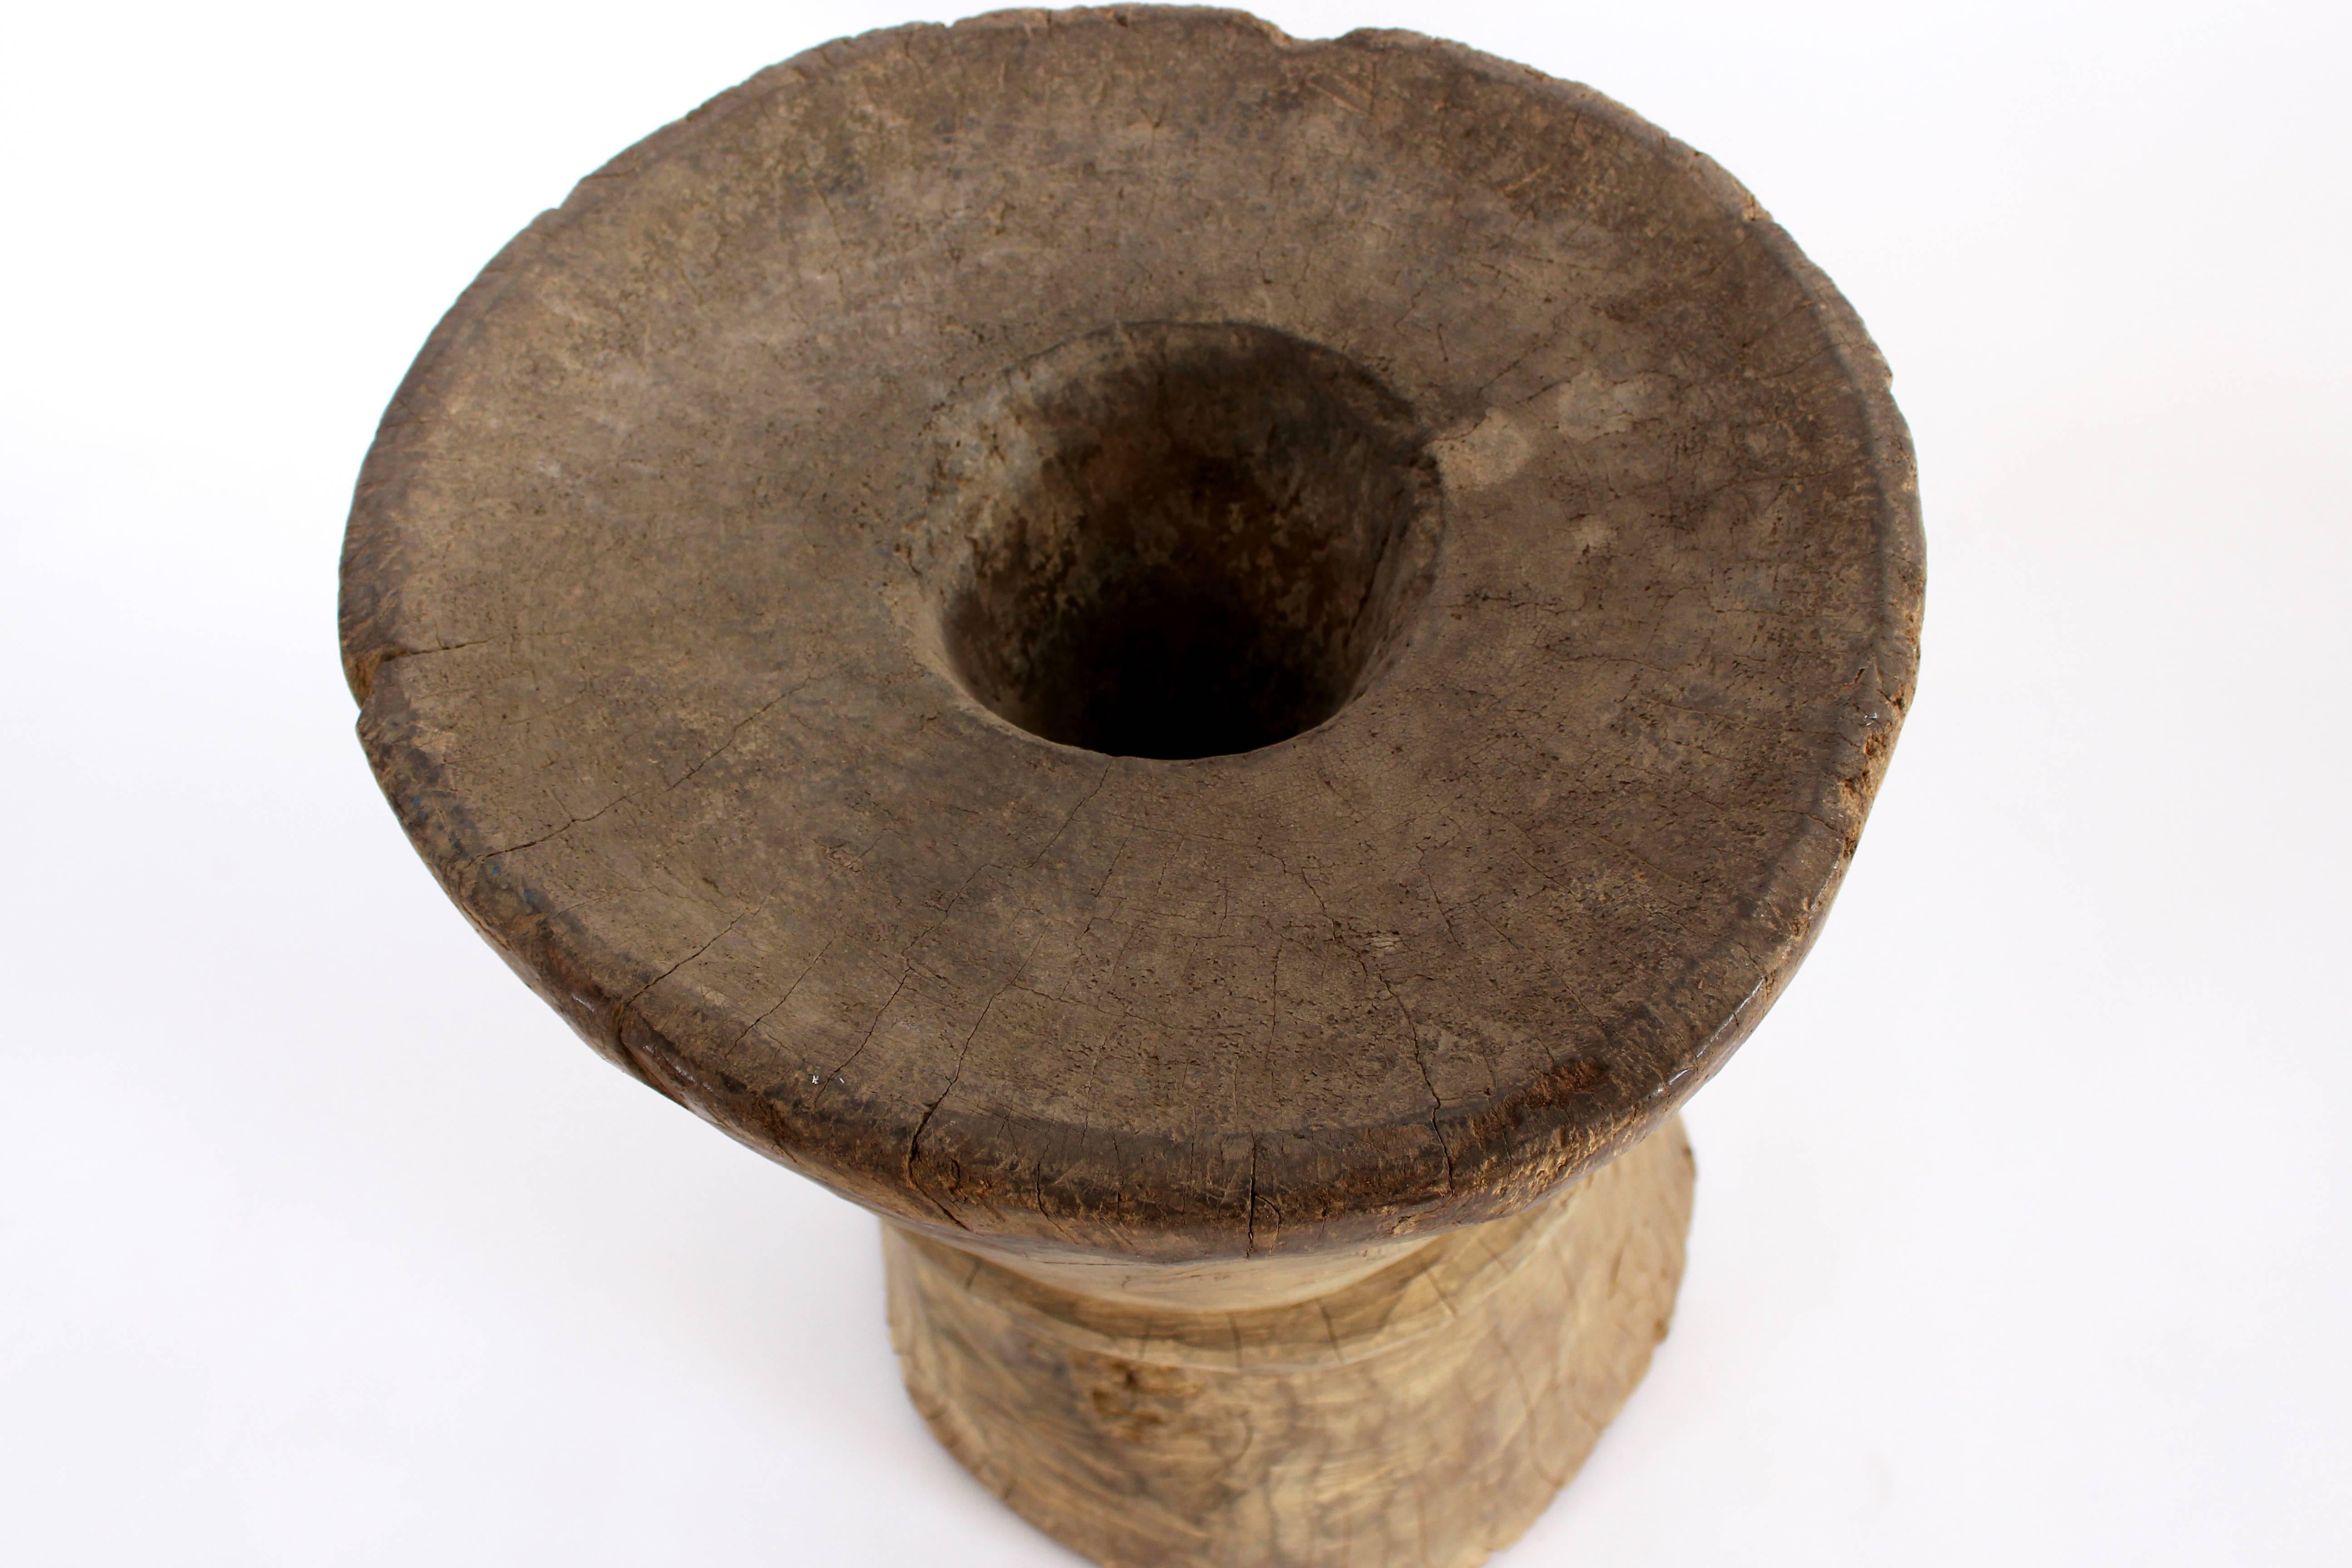 This hourglass shaped mortar has a band decoration around the middle and is accompanied by a carved pestle. The wide top features slightly raised edges and a single hole through its centre.

The Naga are an agriculturally based society. Not only